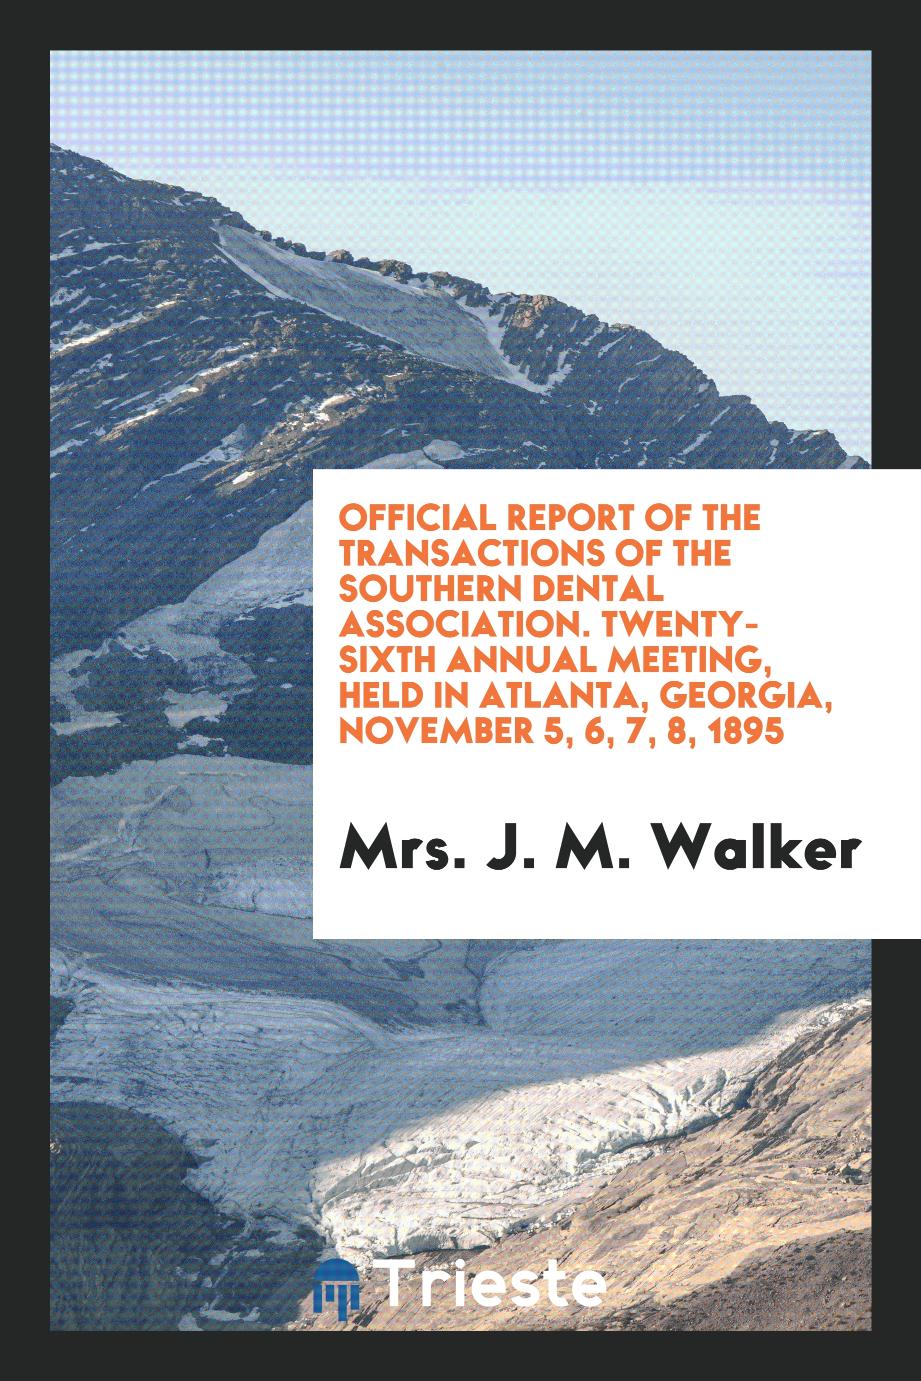 Official Report of the Transactions of the Southern Dental Association. Twenty-Sixth Annual Meeting, Held in Atlanta, Georgia, November 5, 6, 7, 8, 1895